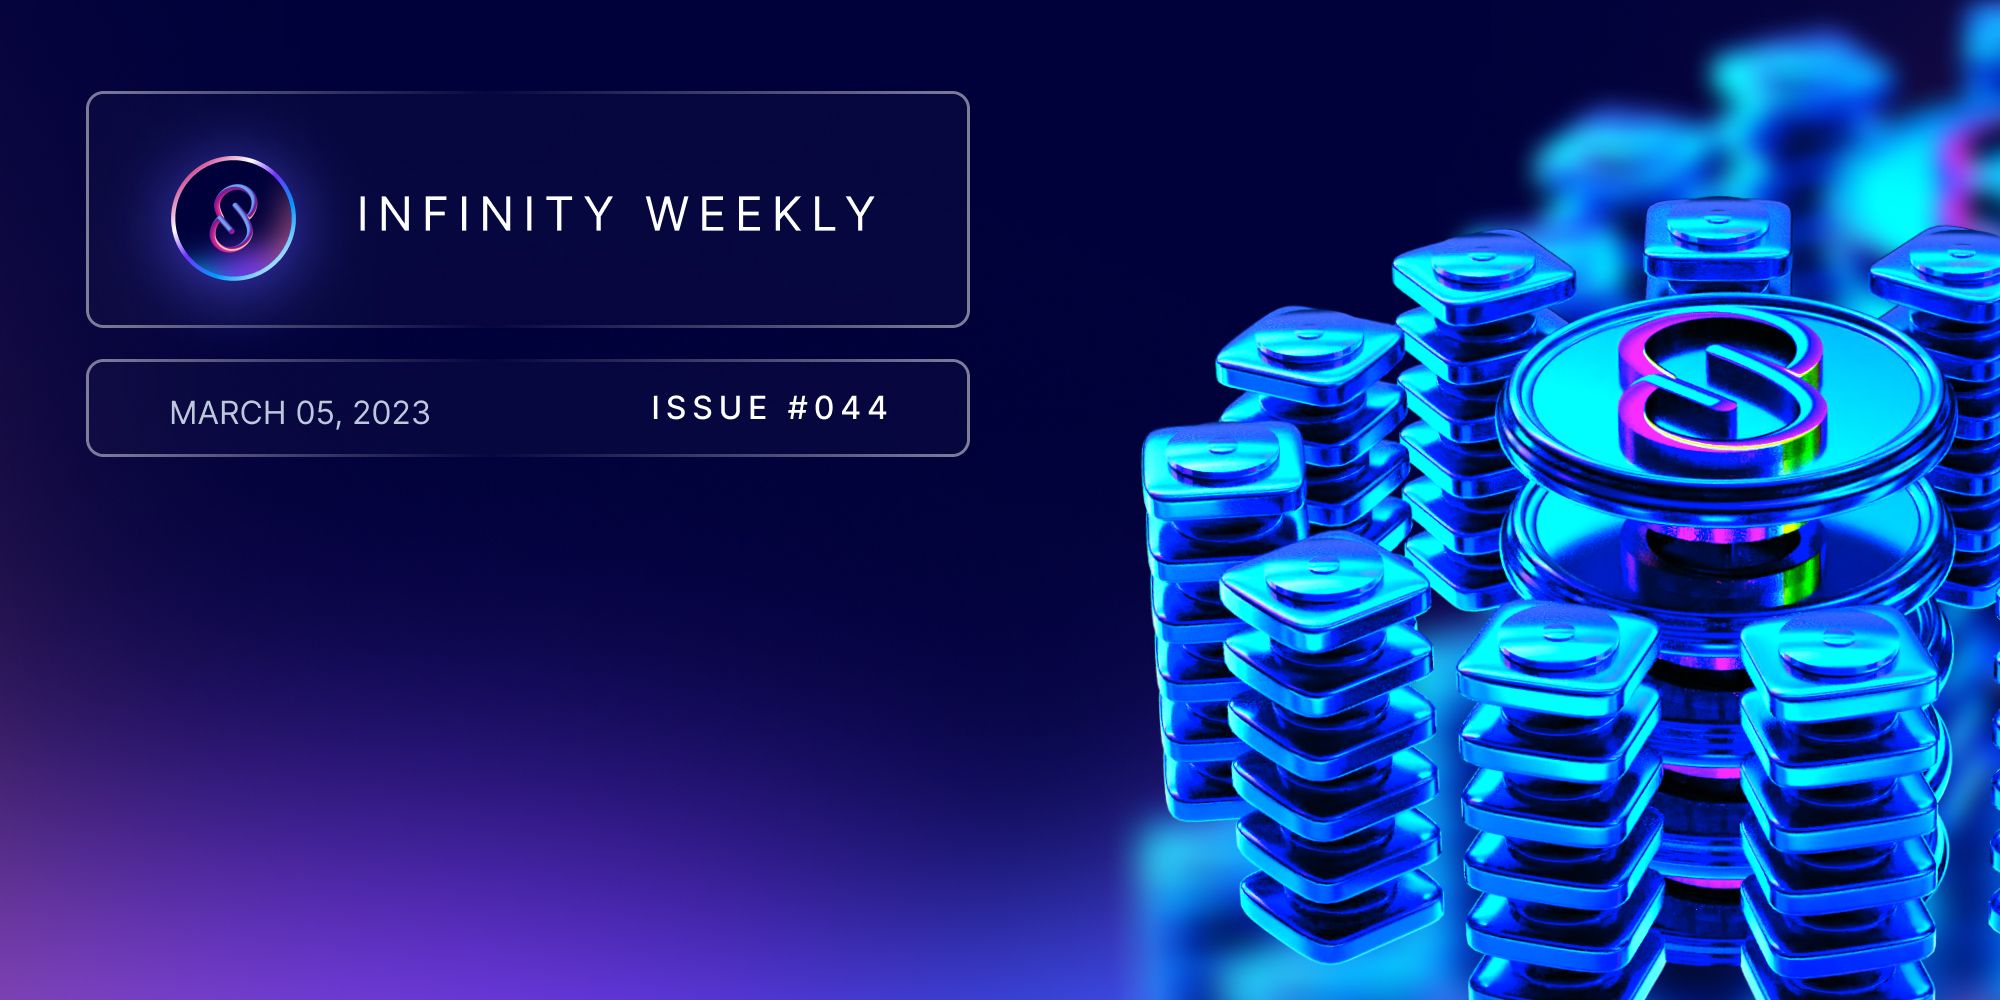 Infinity Weekly: New NFT Project Partnership Initiative